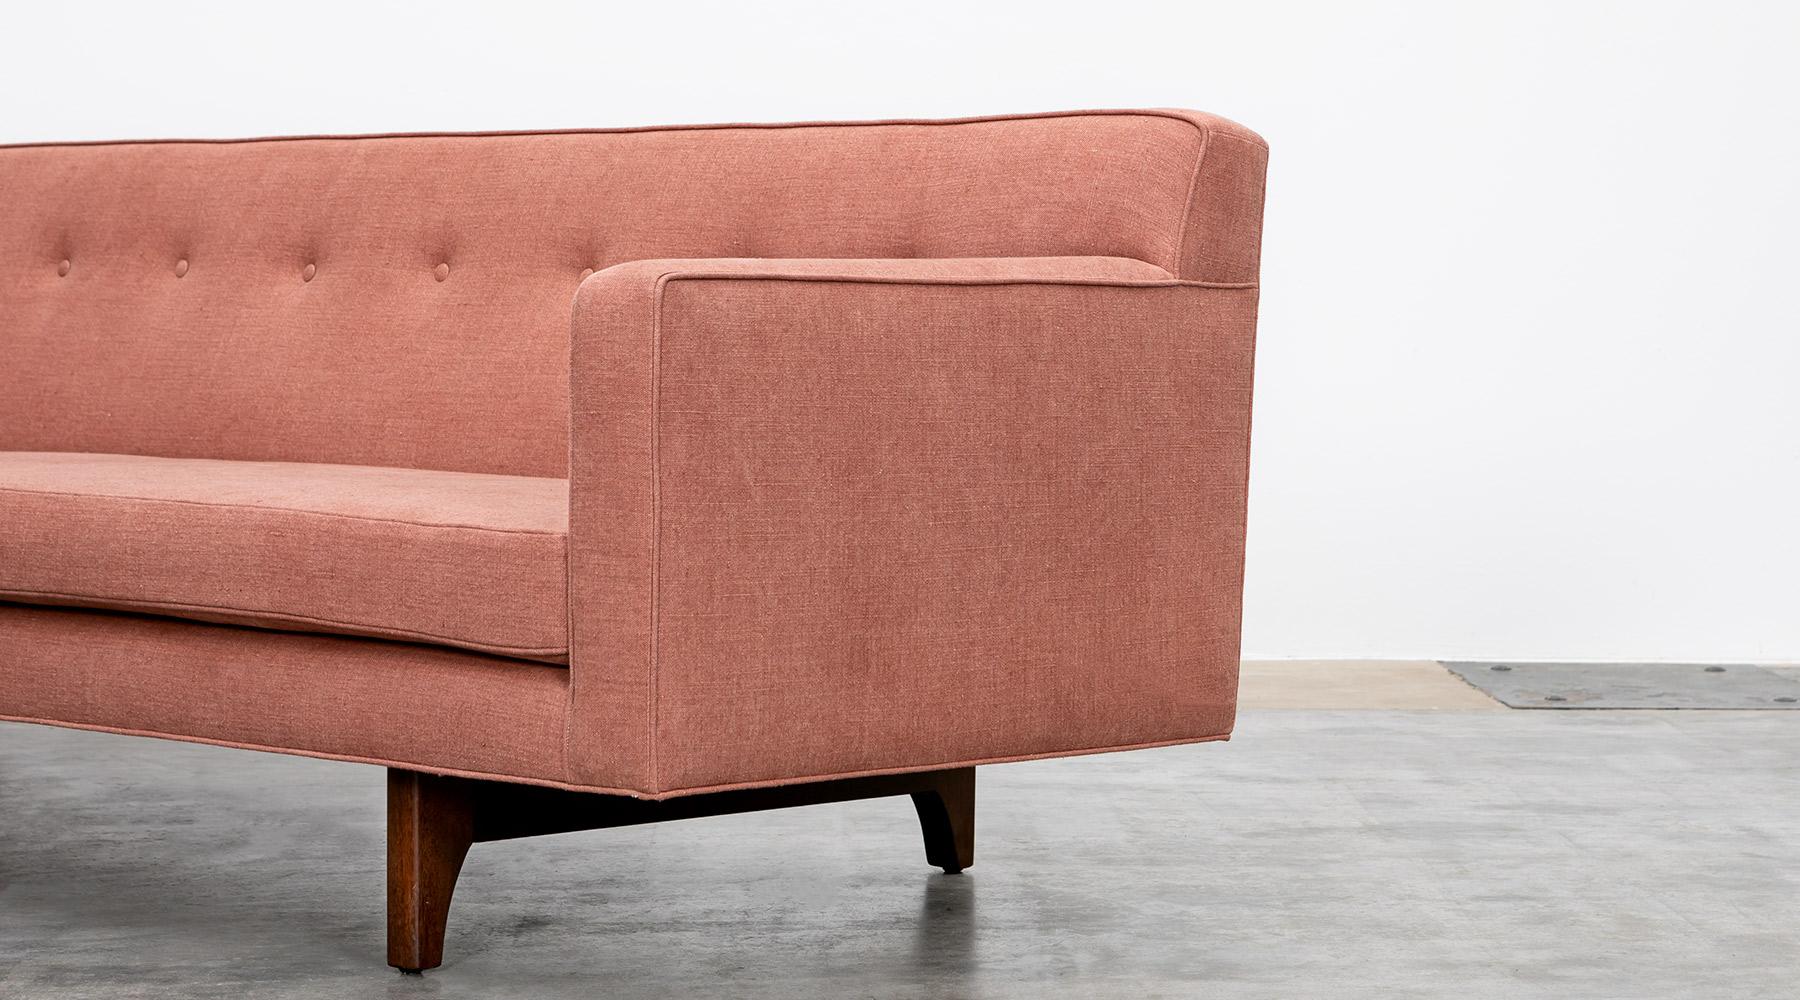 1950s Warm Pink Edward Wormley Sofa 'c' New Upholstery For Sale 4